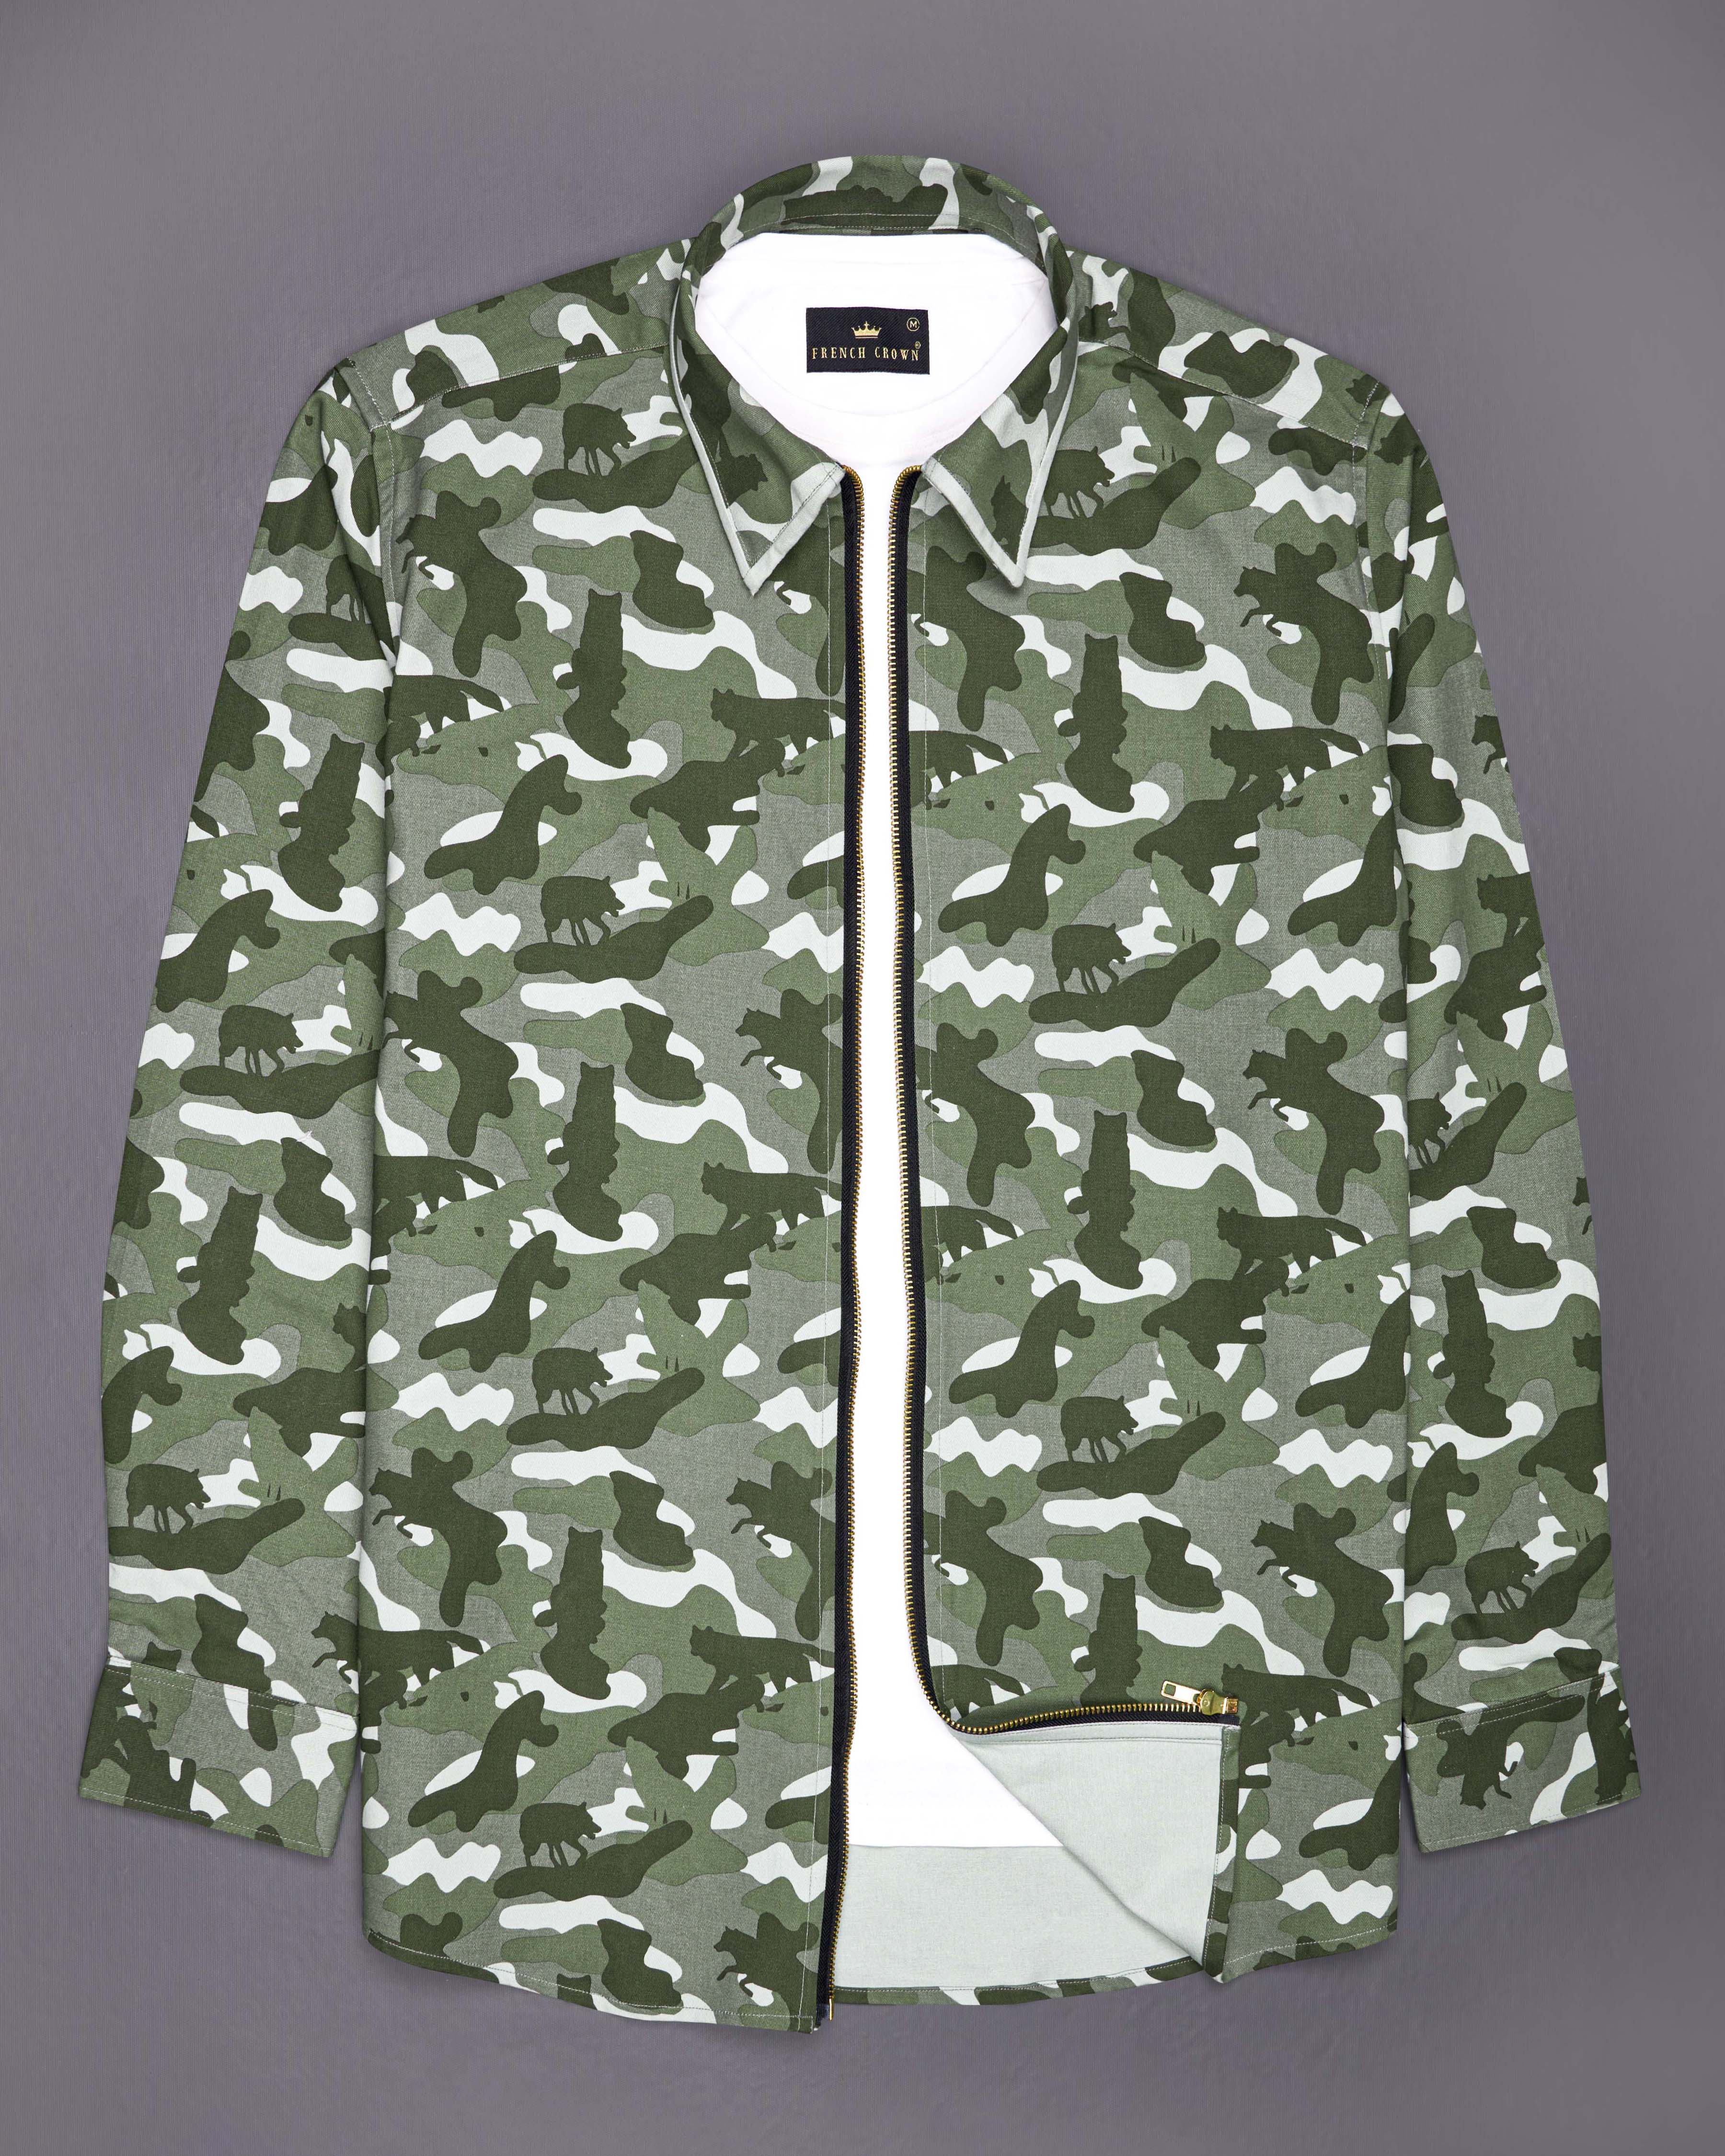 Oyster with Cactus Green Camouflage Royal Oxford Bomber Jacket ,8800-ZP-38,8800-ZP-H-38,8800-ZP-39,8800-ZP-H-39,8800-ZP-40,8800-ZP-H-40,8800-ZP-42,8800-ZP-H-42,8800-ZP-44,8800-ZP-H-44,8800-ZP-46,8800-ZP-H-46,8800-ZP-48,8800-ZP-H-48,8800-ZP-50,8800-ZP-H-50,8800-ZP-52,8800-ZP-H-52